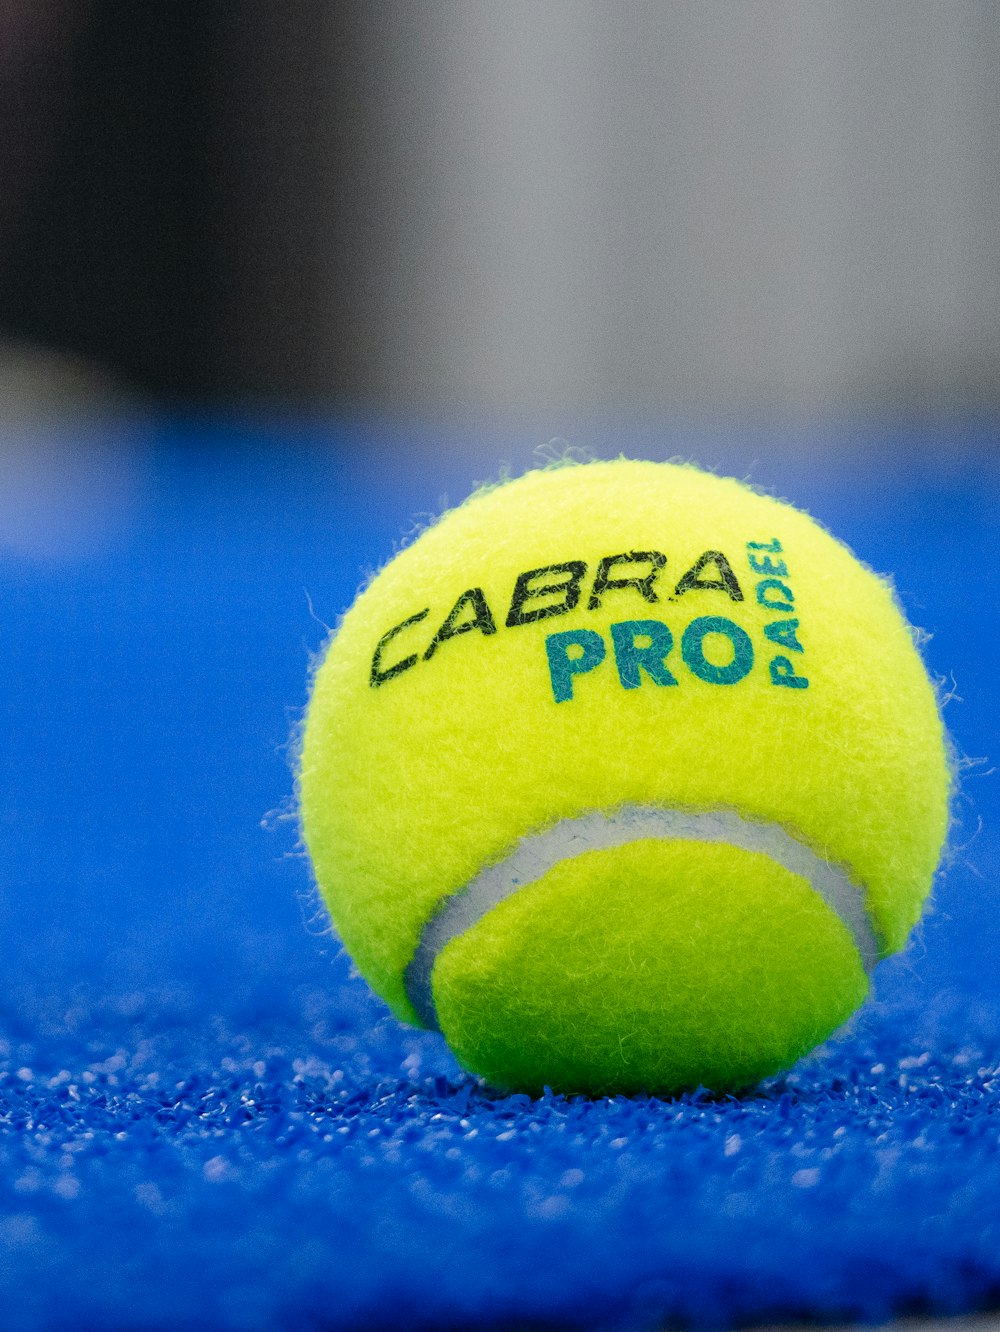 a tennis ball with a yellow and black logo on it